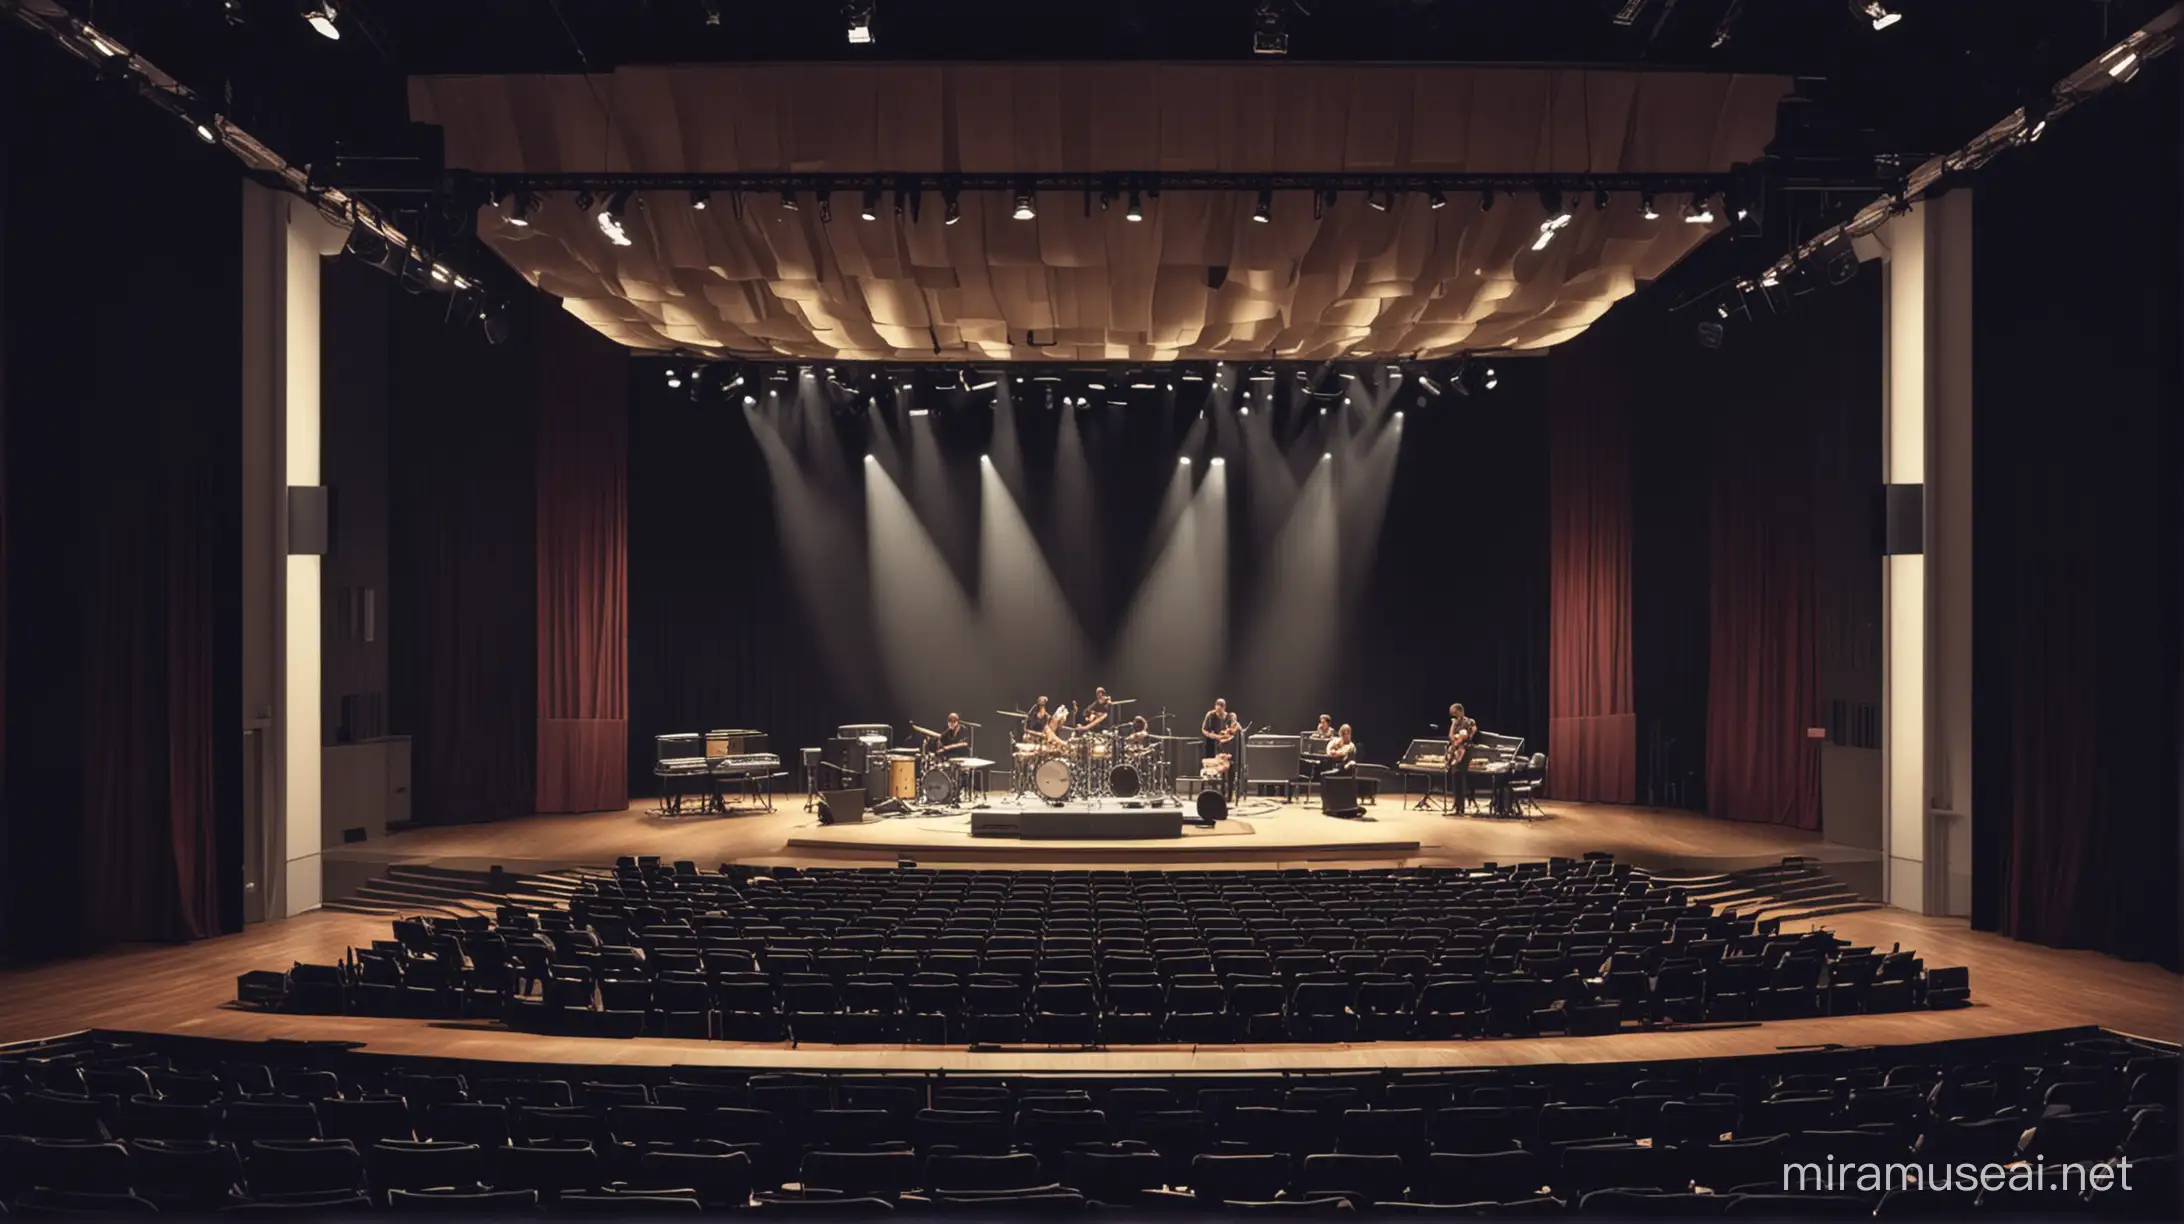 inside of a modern auditorium, one point perspective to the stage,band playing music on the stages.